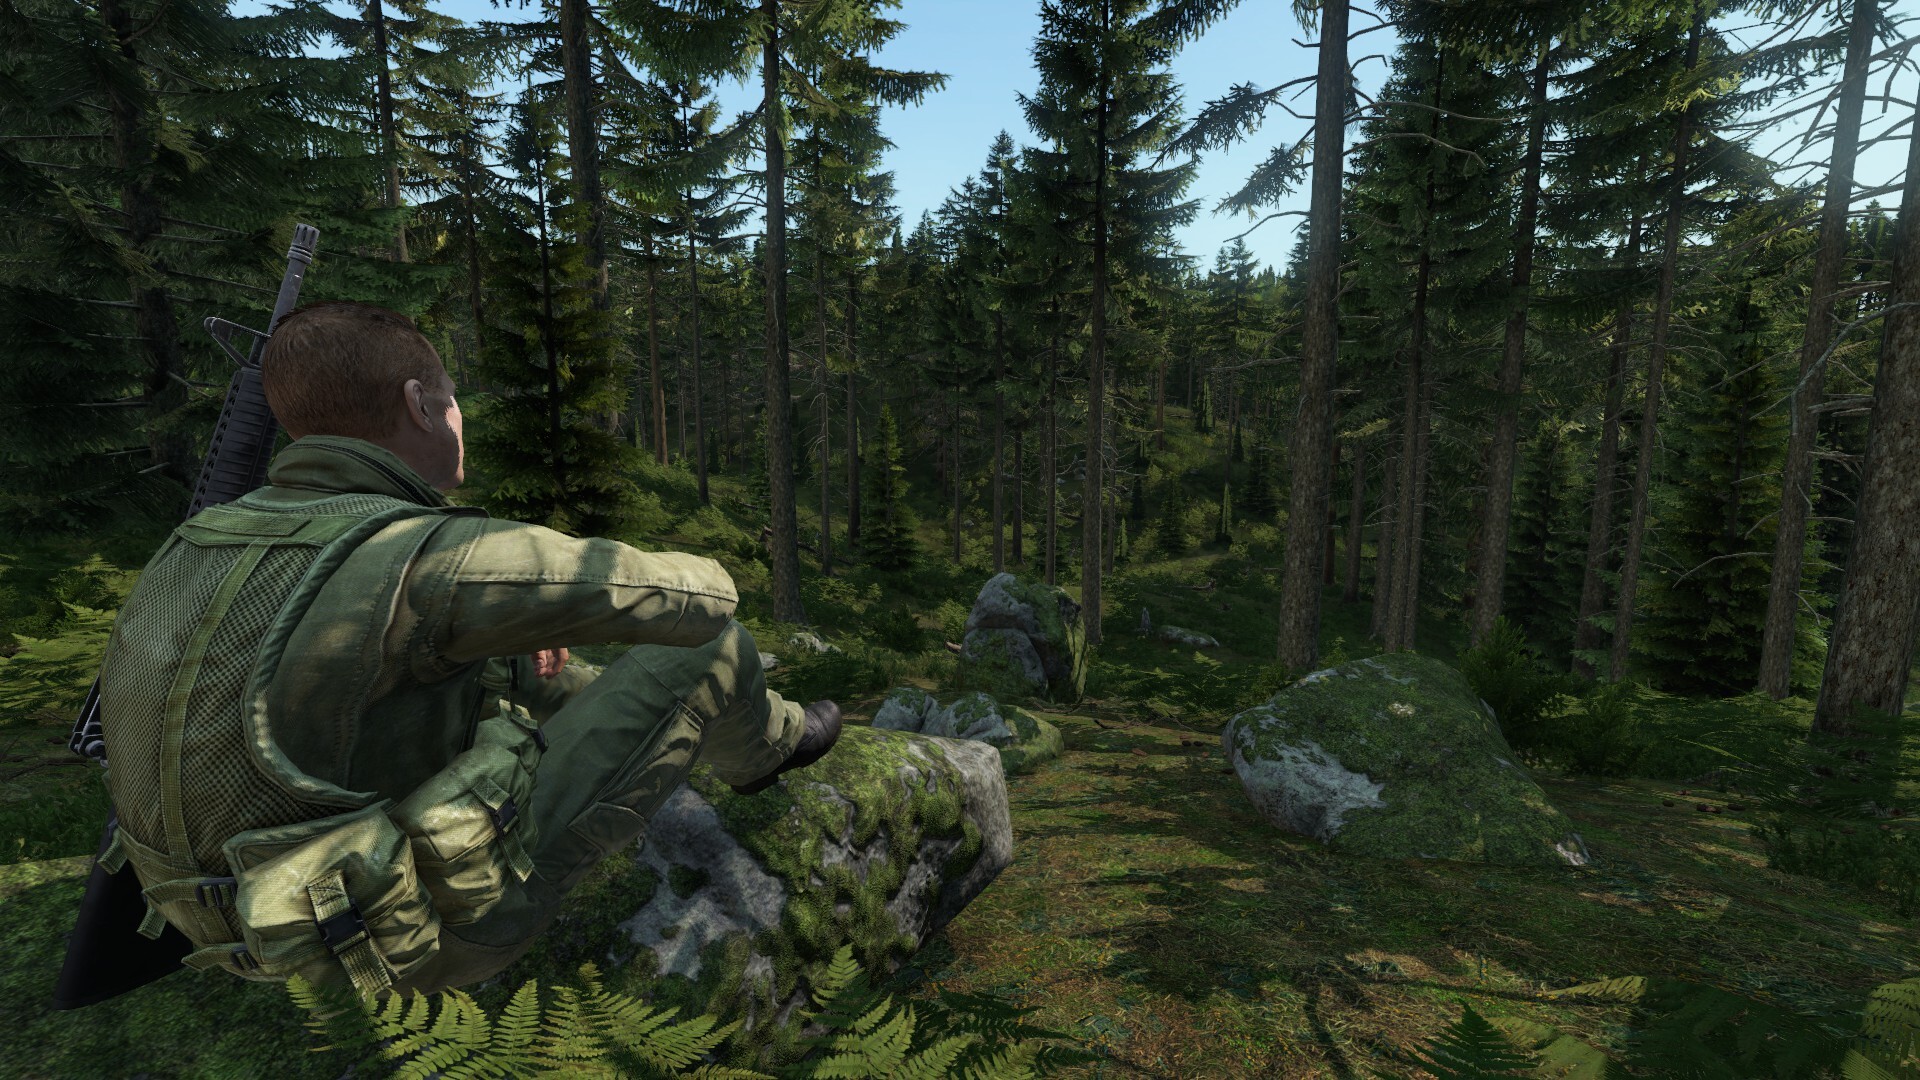 DayZ Experimental 1.4 Update no.3 fixes more bugs and issues